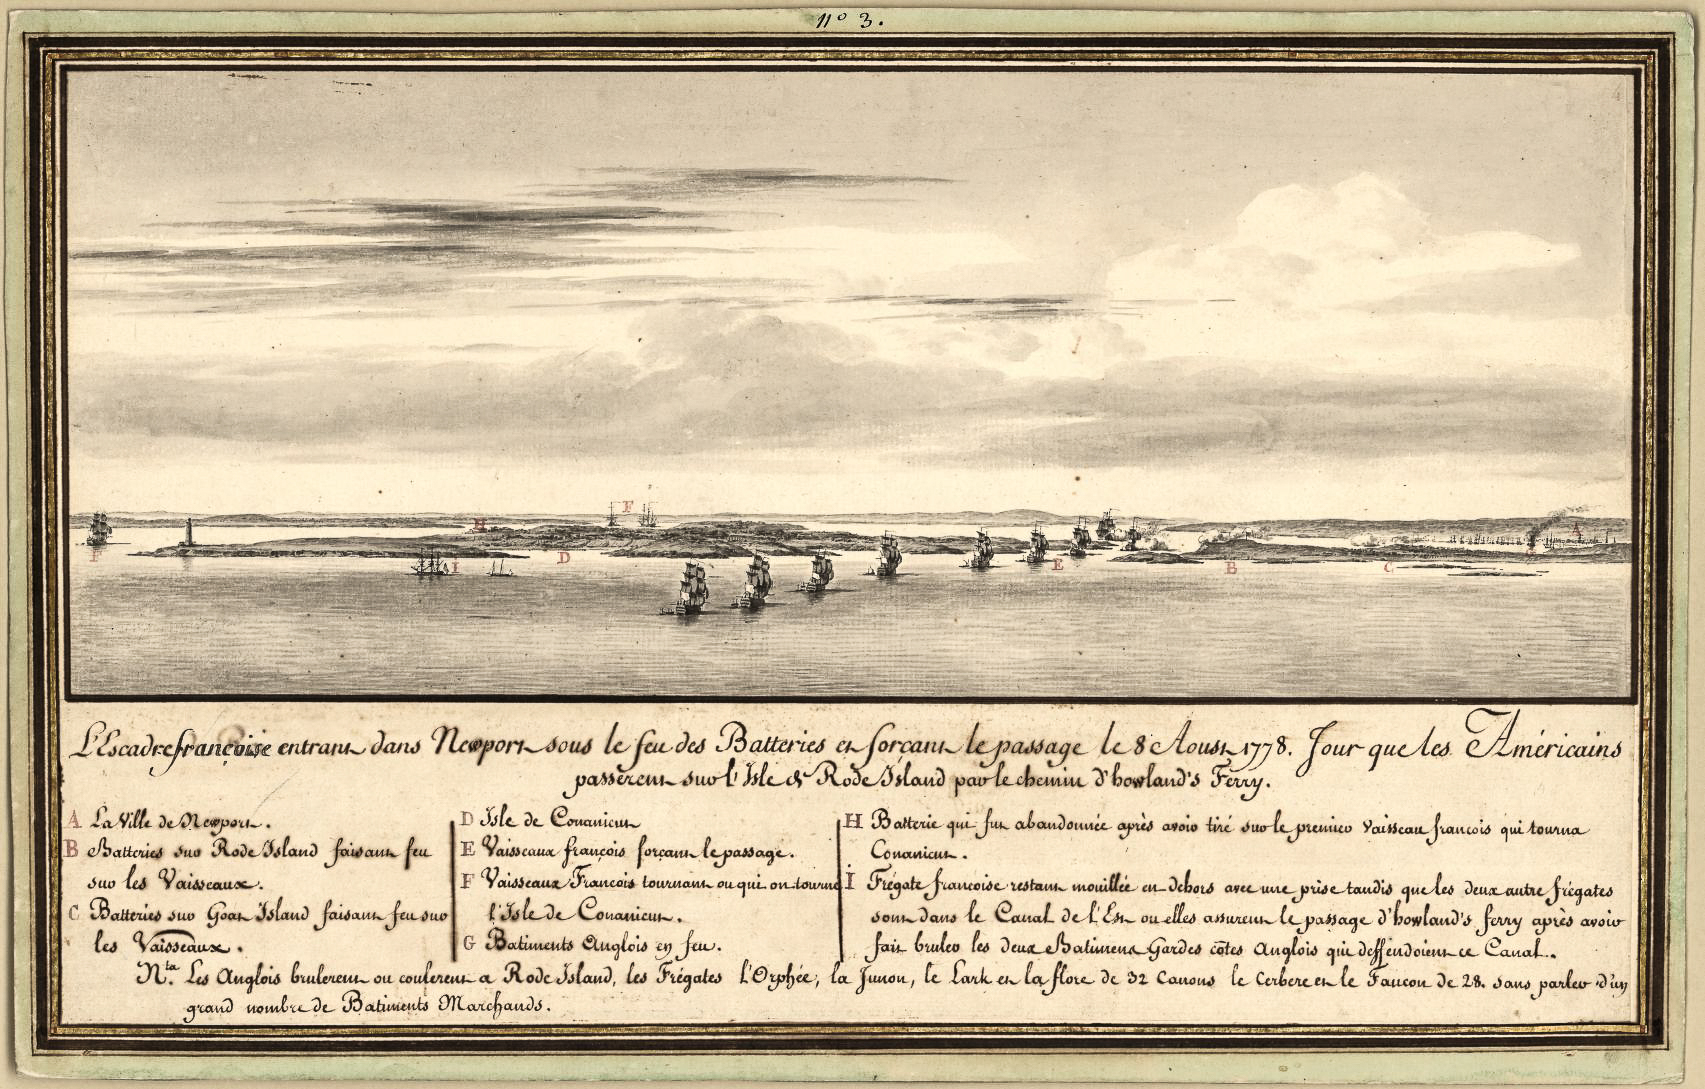 A handdrawn view of the French fleet arriving to Newport Harbor in the Battle of Rhode Island 